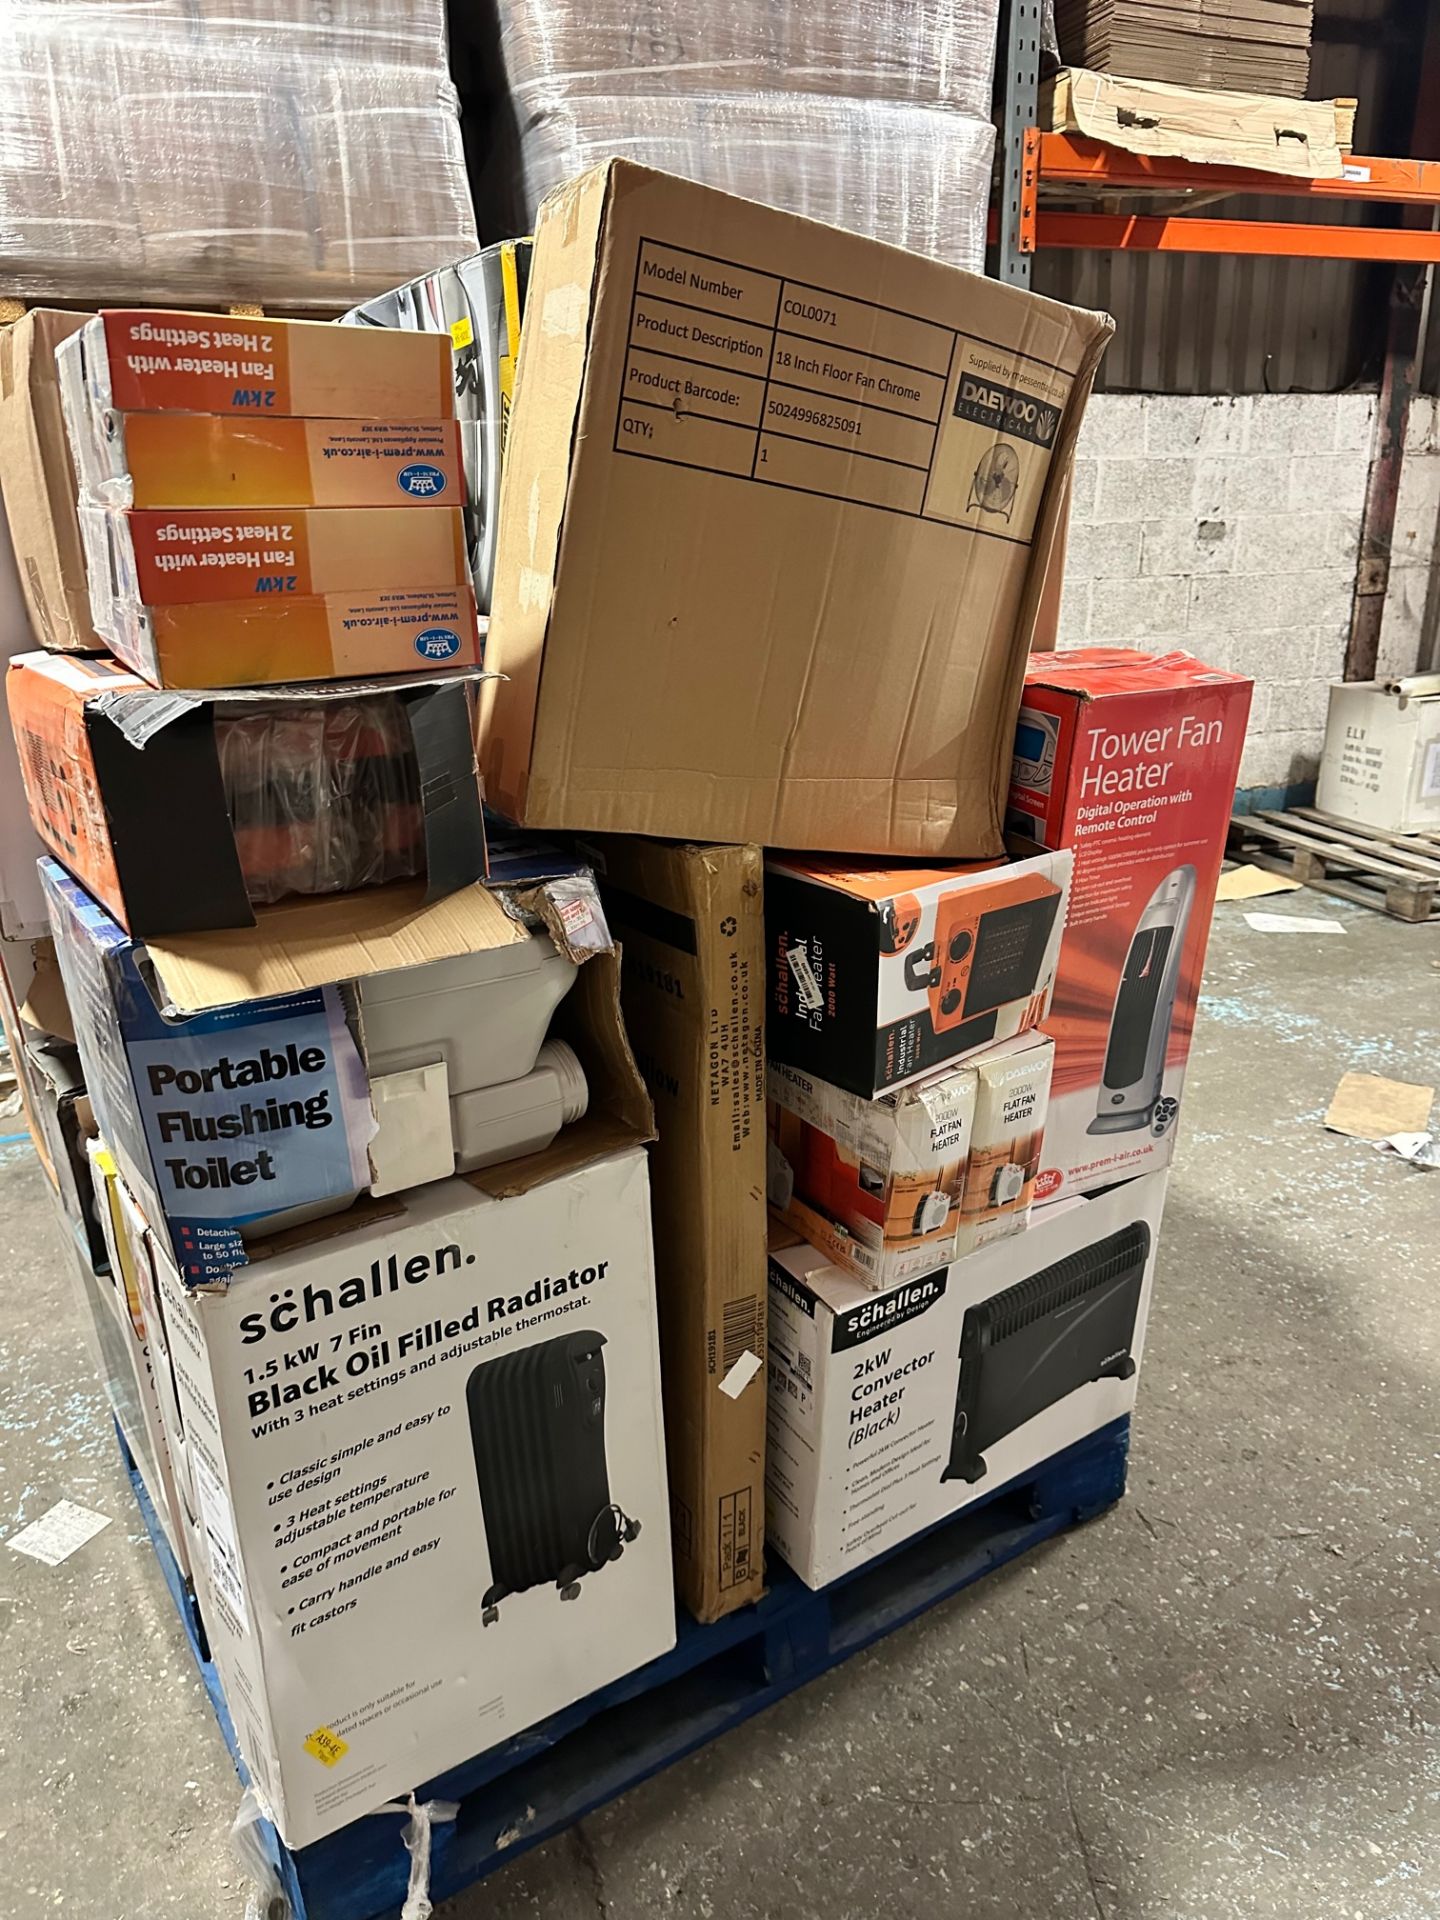 MIXED PALLET OF E-COMMERCE RETURNED GOODS (MAINLY HEATERS) - RRP WORTH £1533.59